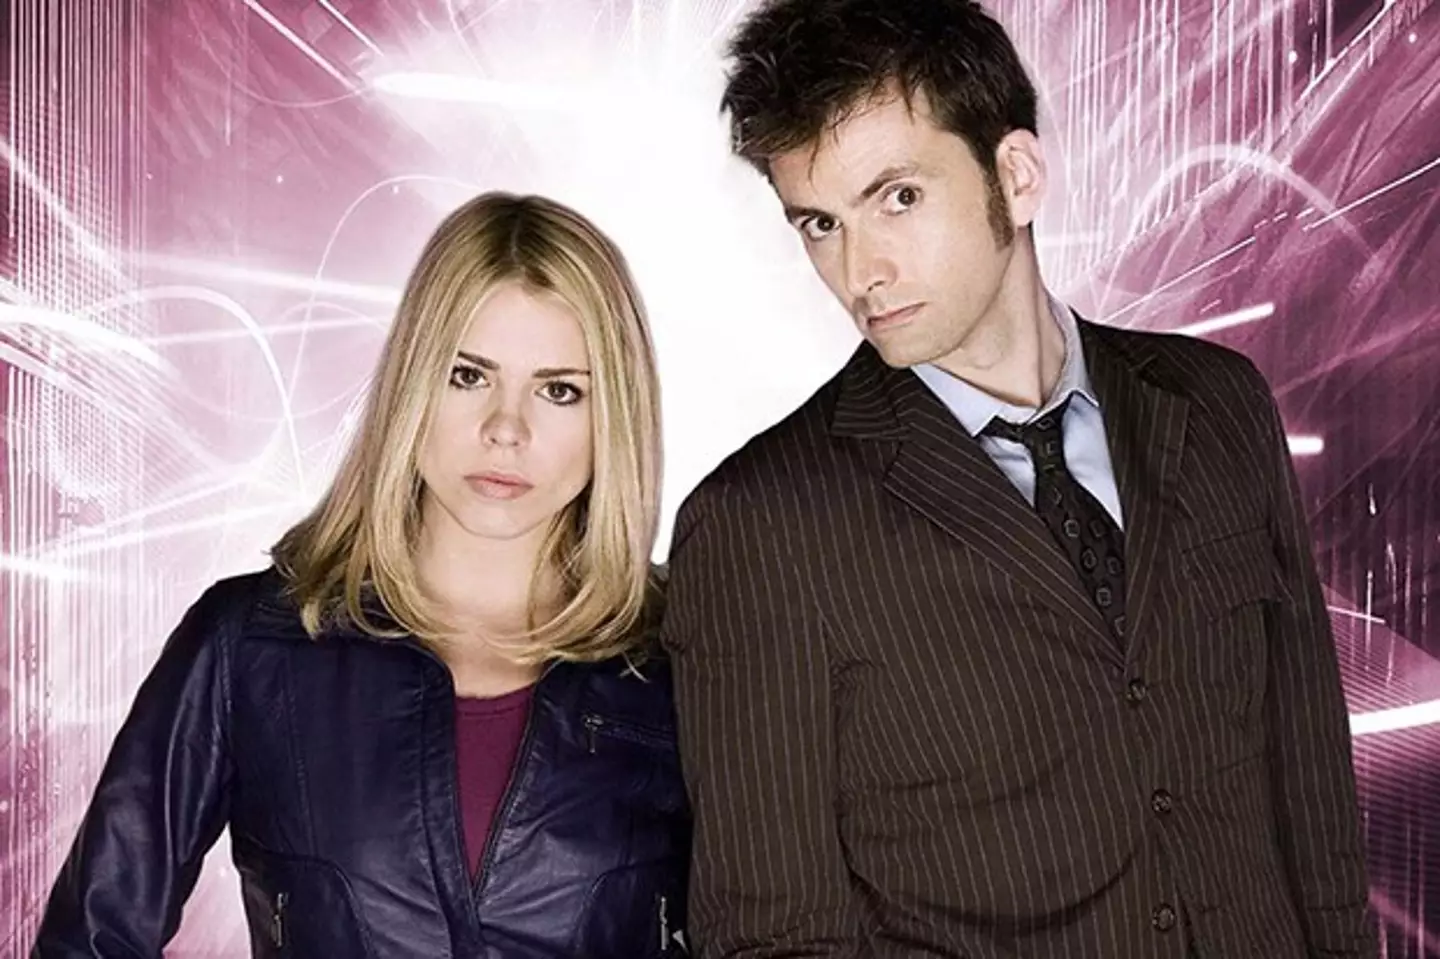 Billie Piper and David Tennant in Doctor Who.